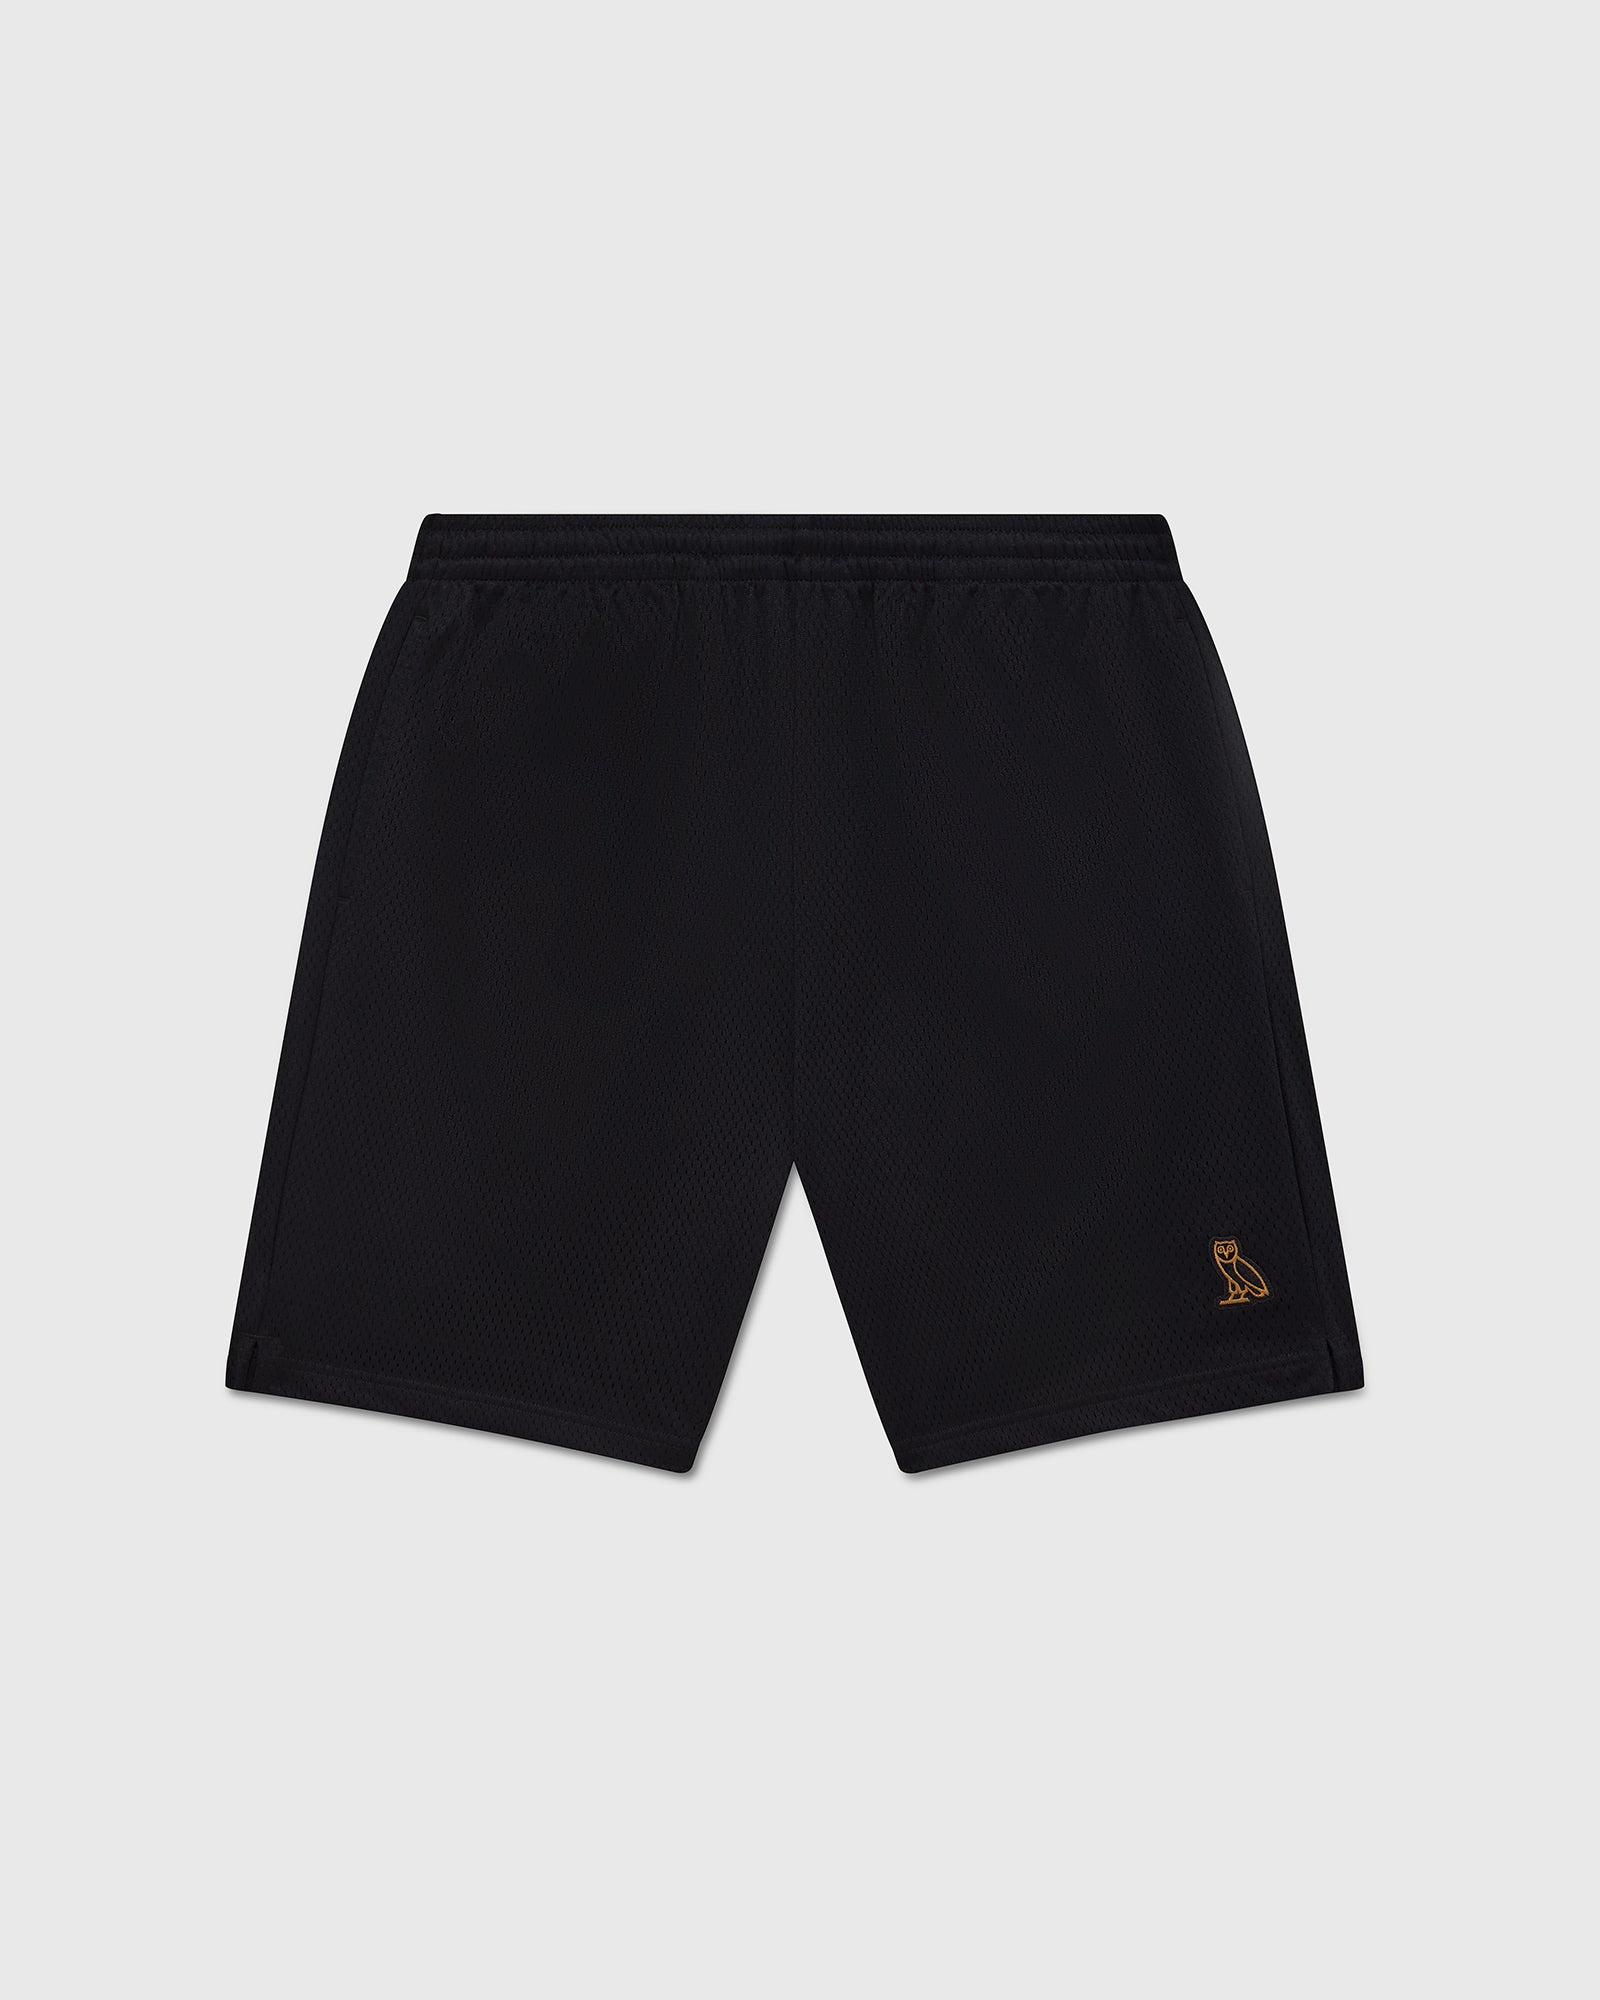 Classic Mesh Short - Off-White - October's Very Own